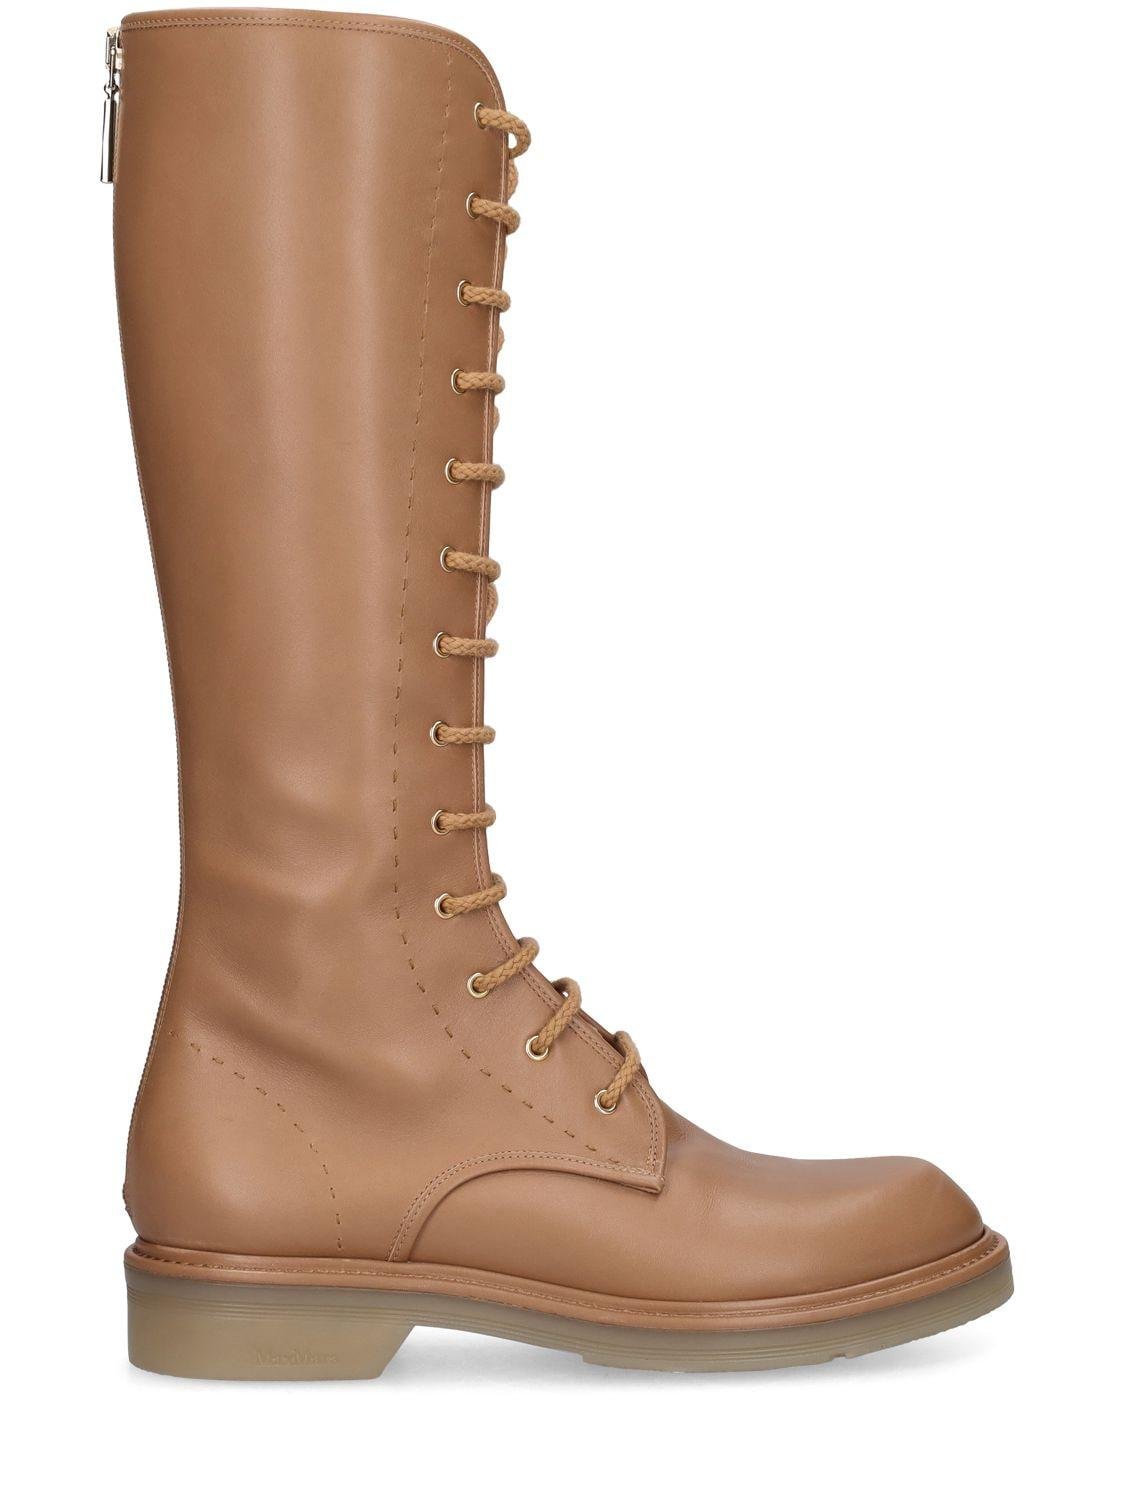 Lvr Exclusive Leather Combat Boots by MAX MARA